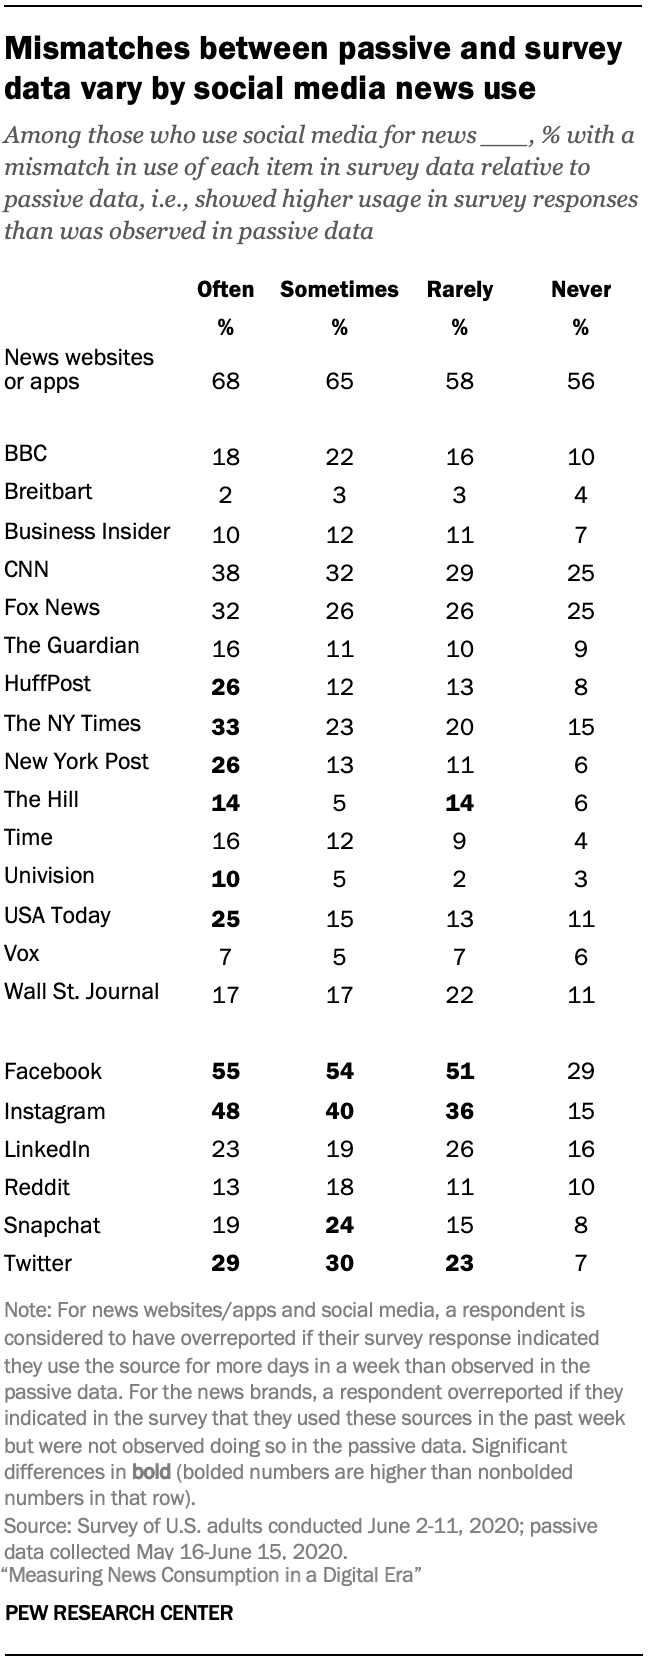 Mismatches between passive and survey data vary by social media news use